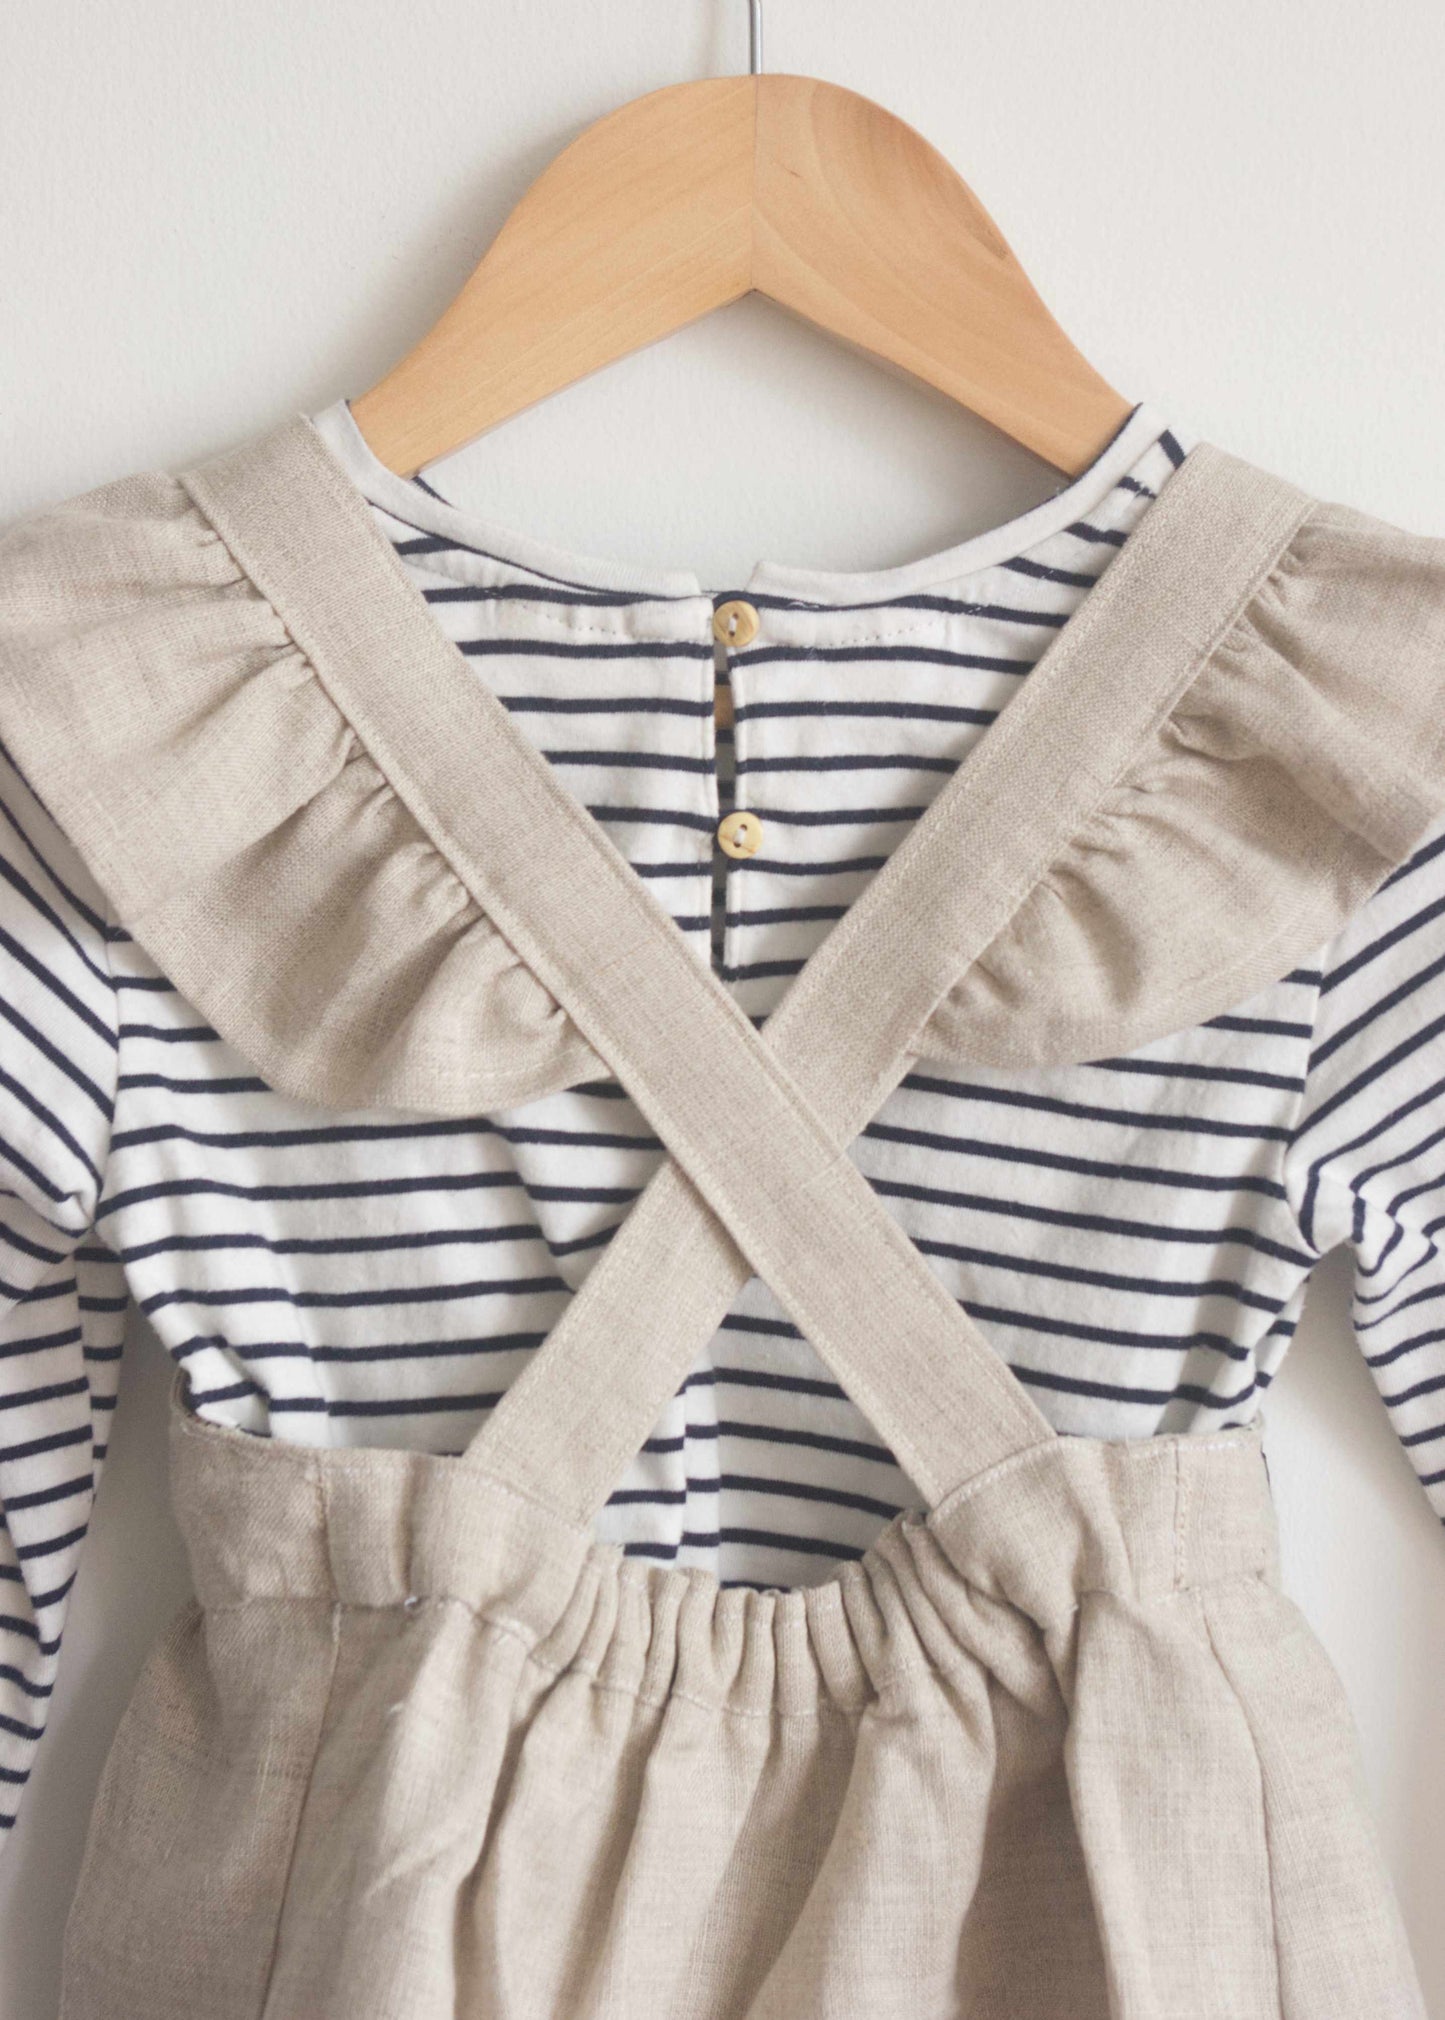 pinafore dress pattern back with ruffles and striped shirt